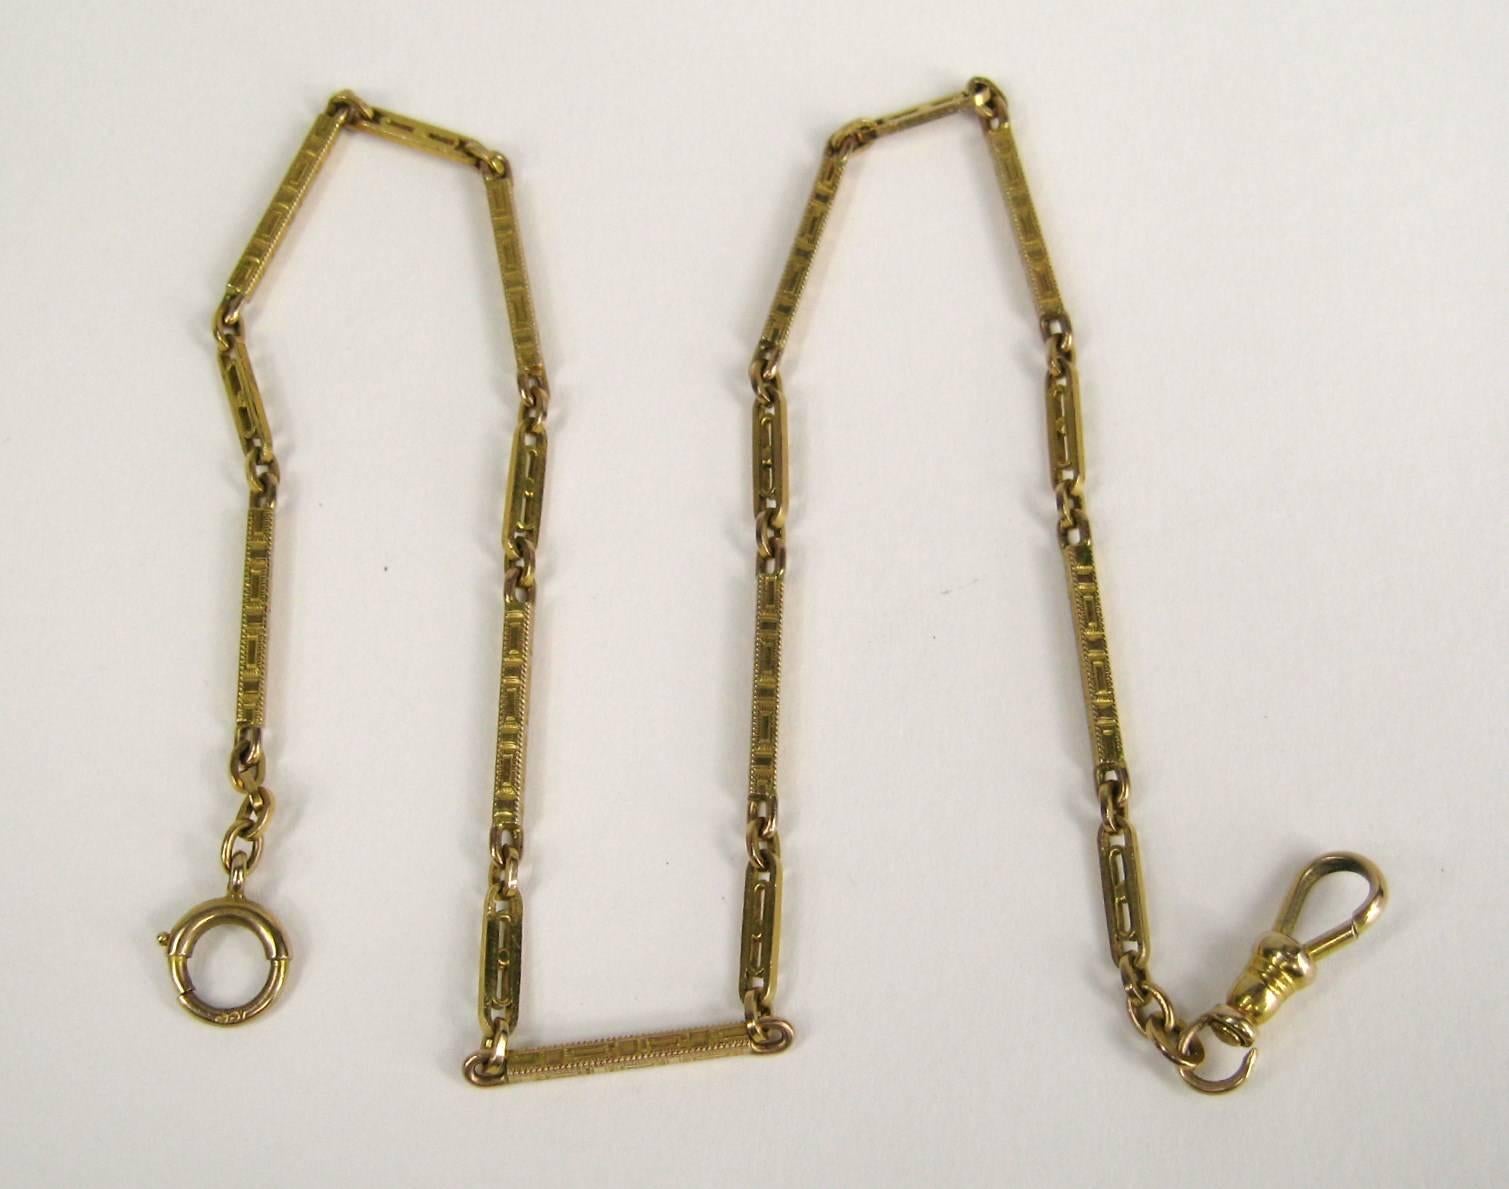 Stunning links on this early 10K gold Watch Chain. Measuring approximately 13.88 long end to end. Links measure .60 and .36. You can certainly add an extension on the back and wear as a Necklace. What more can you ask for? Think outside the box!